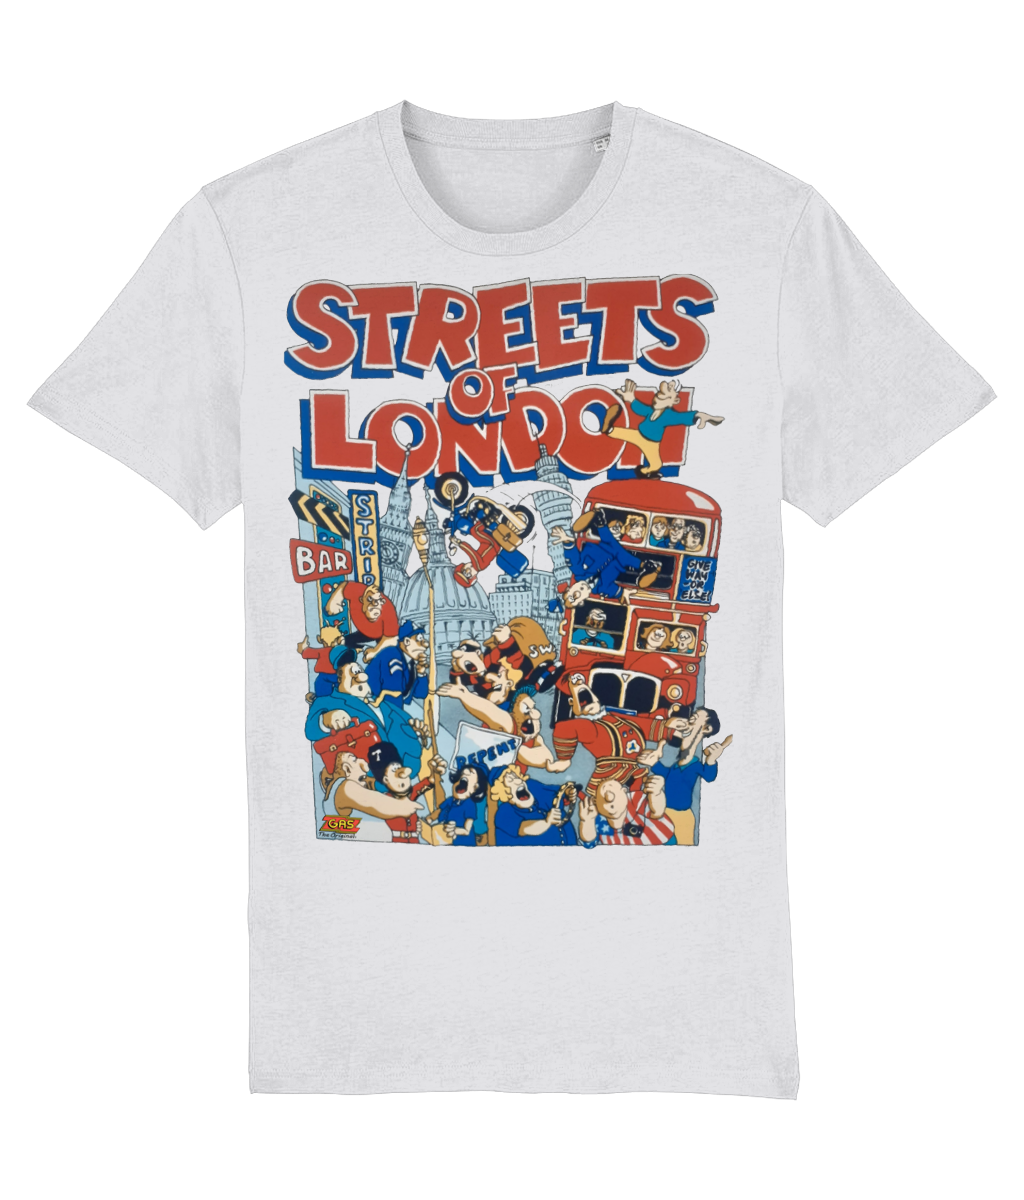 SALE of Streets of London-Retro-GAS T Shirts-SO01